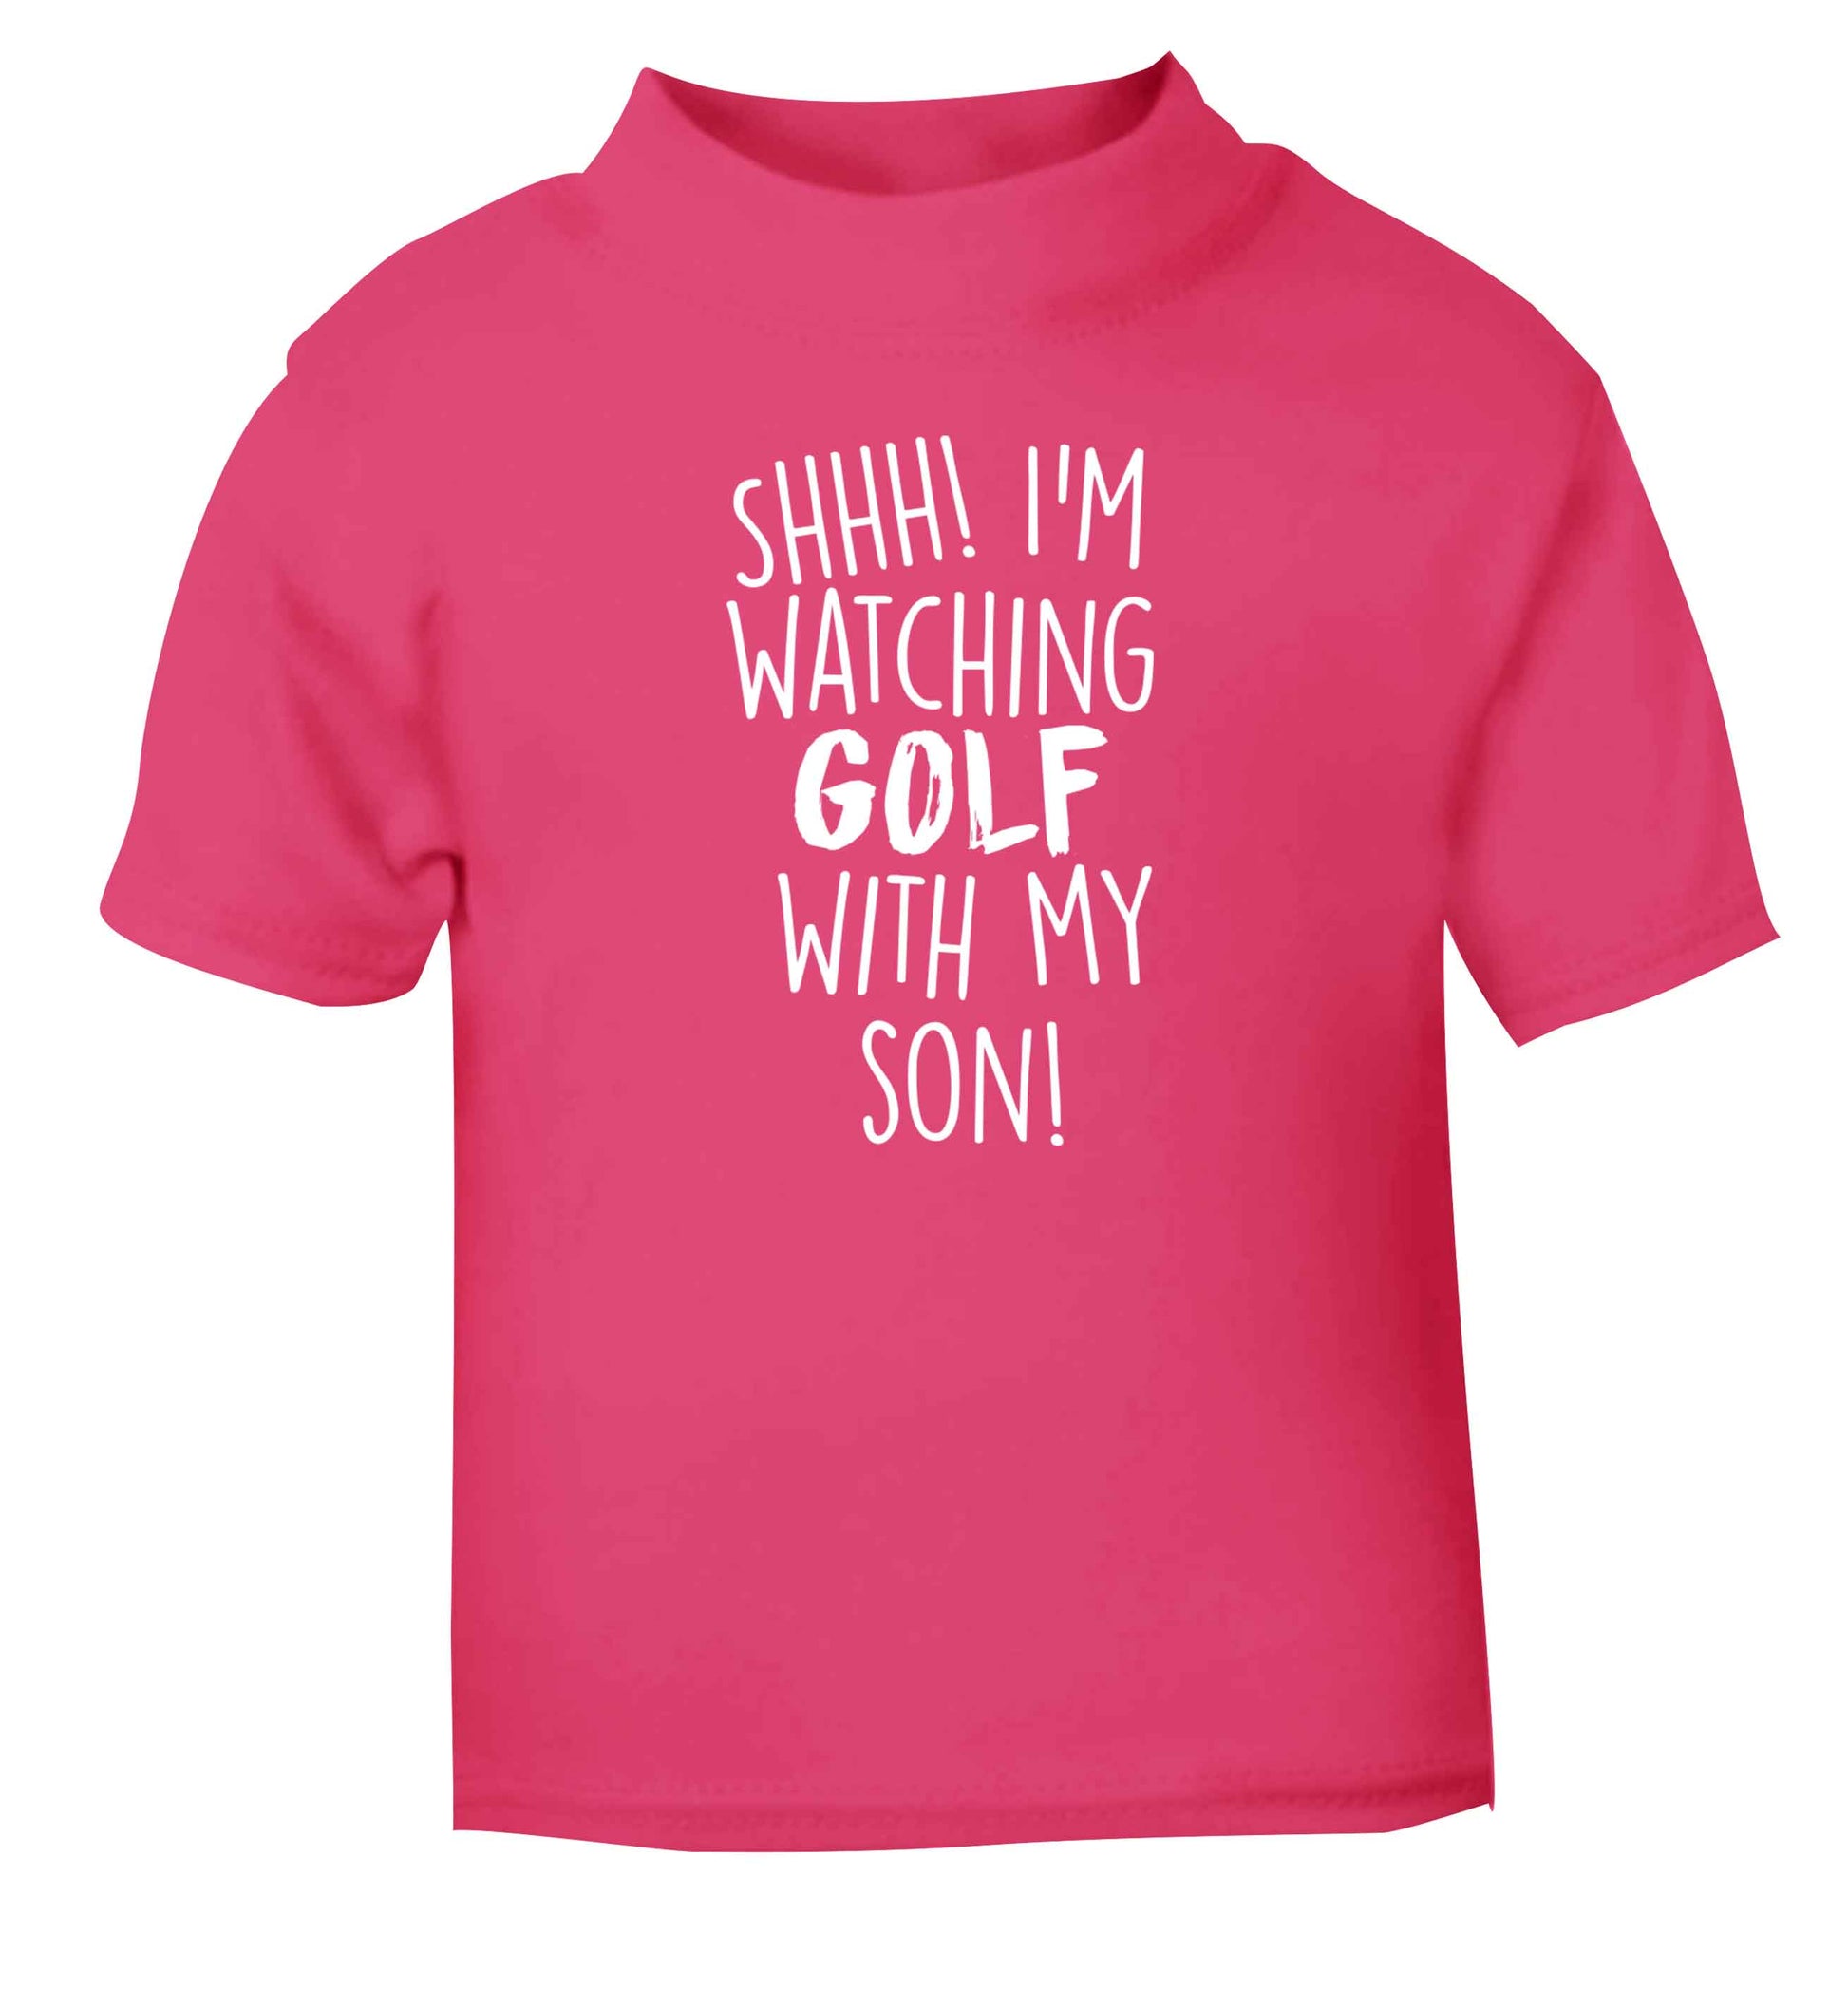 Shh I'm watching golf with my son pink Baby Toddler Tshirt 2 Years